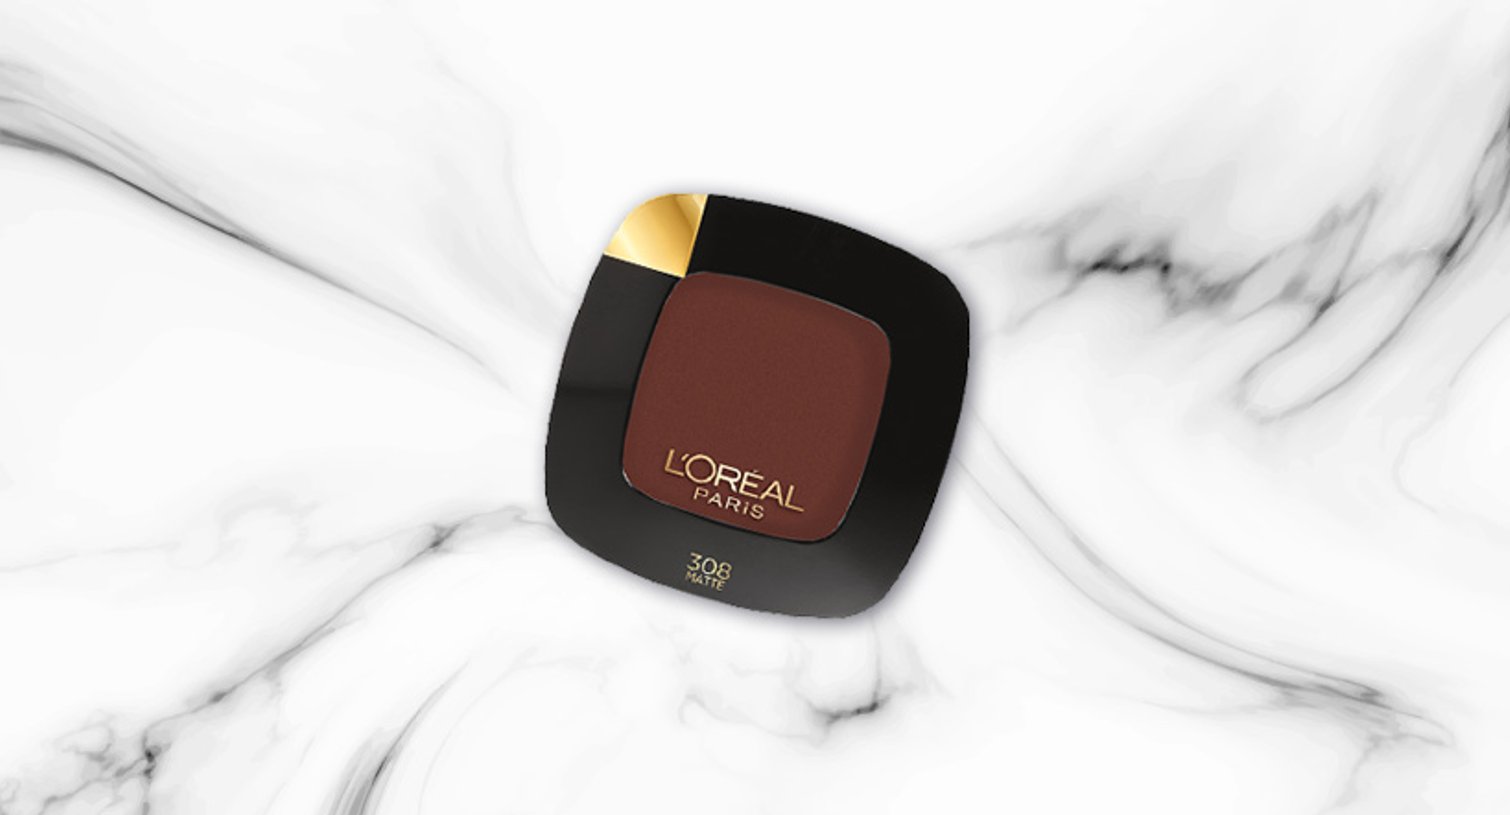 Loreal Paris BMAG Slideshow 4 Eye Makeup Looks That Are Even Better With Burgundy Mascara SLIDE 3